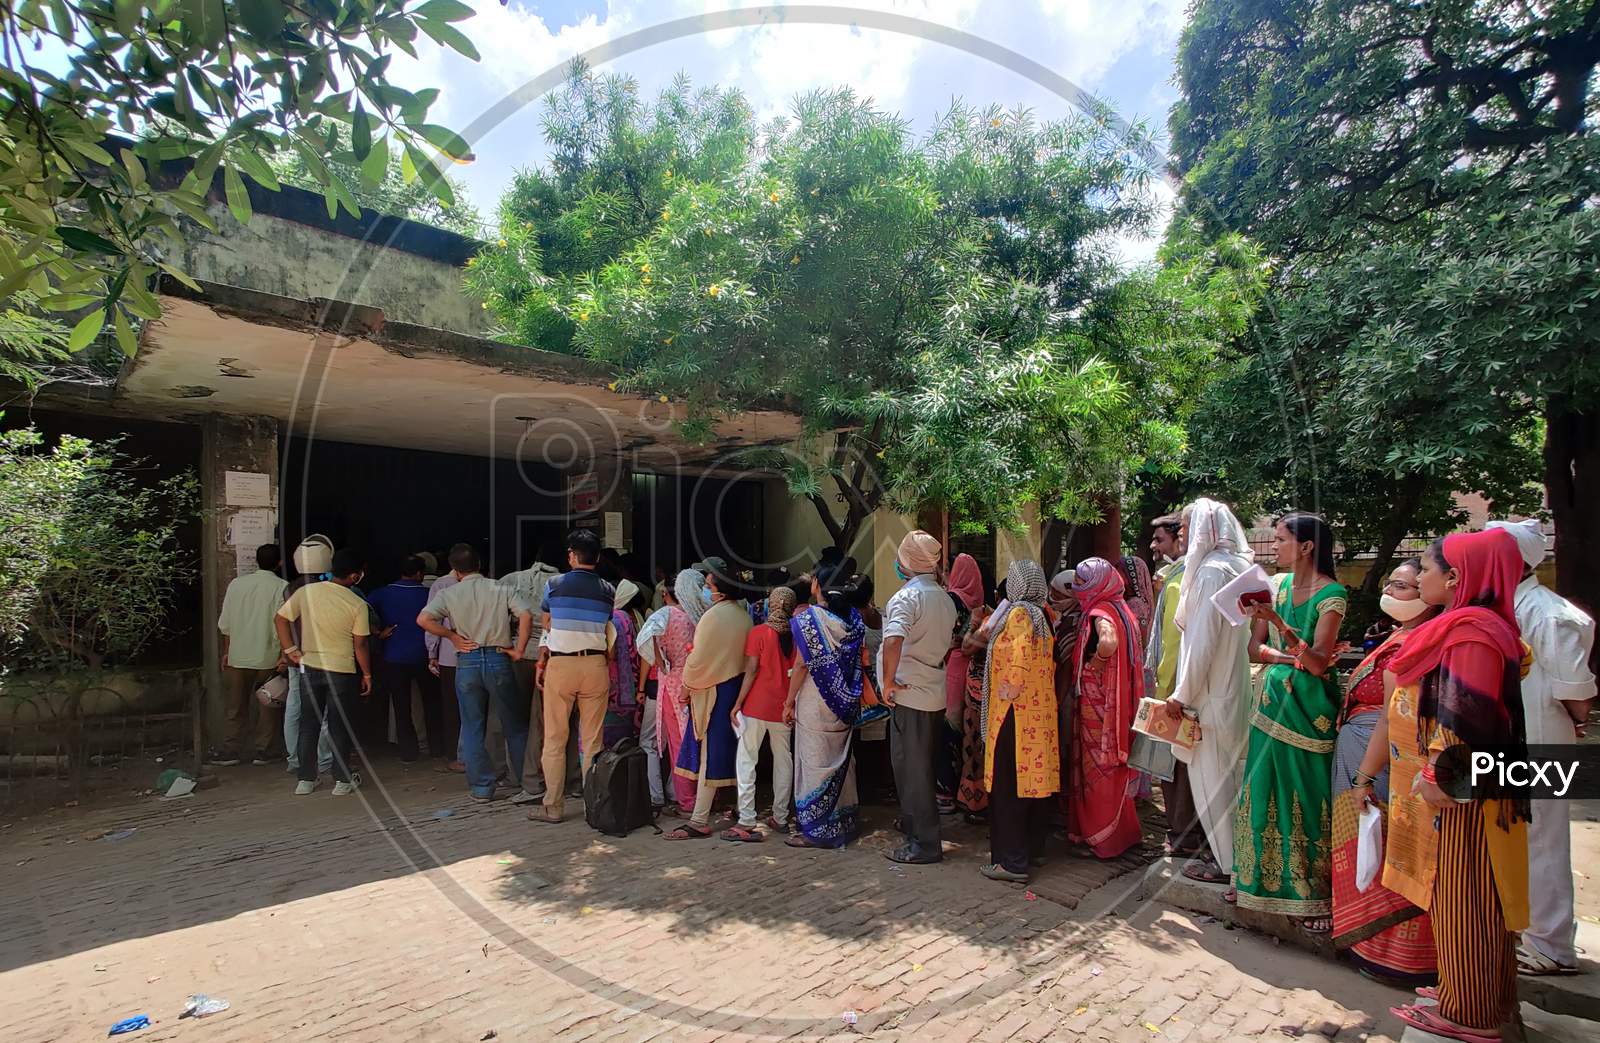 07.09.2021 Kanpur India. People Standing In Queue For Vaccination.